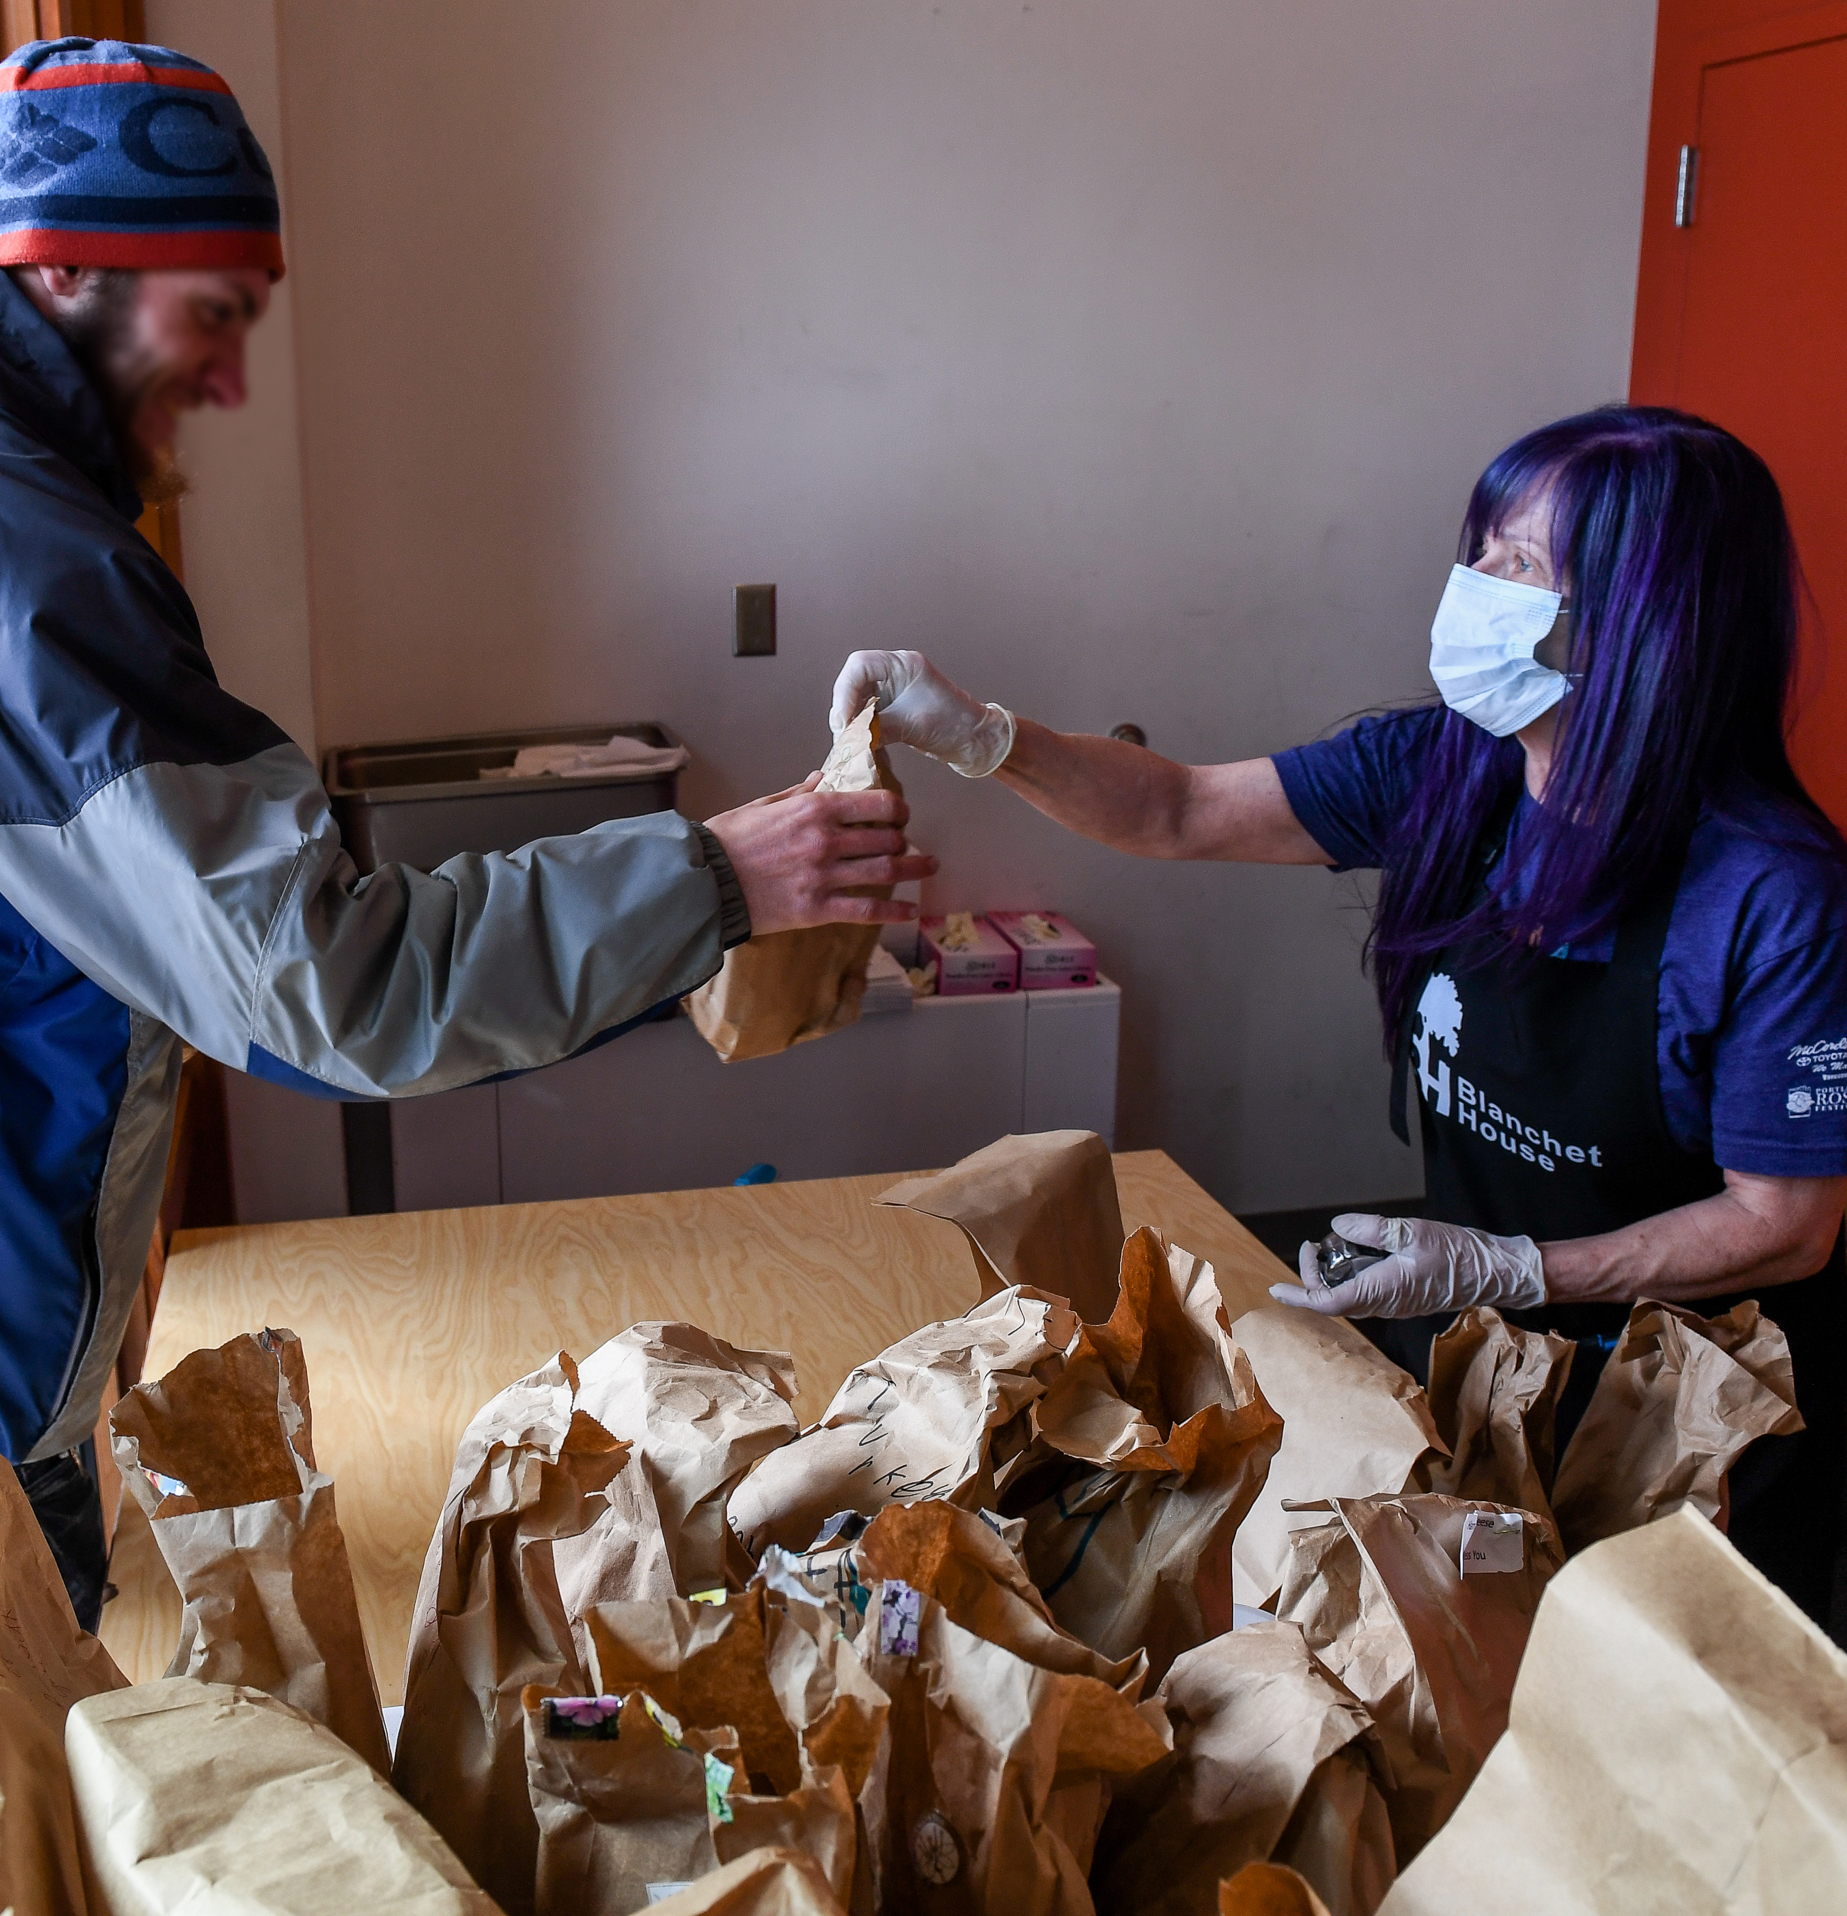 Josi Whitney volunteers to serve lunch at Blanchet House of Hospitality during the COVID19 pandemic in Portland, Oregon. Photo by Justin Katigbak.